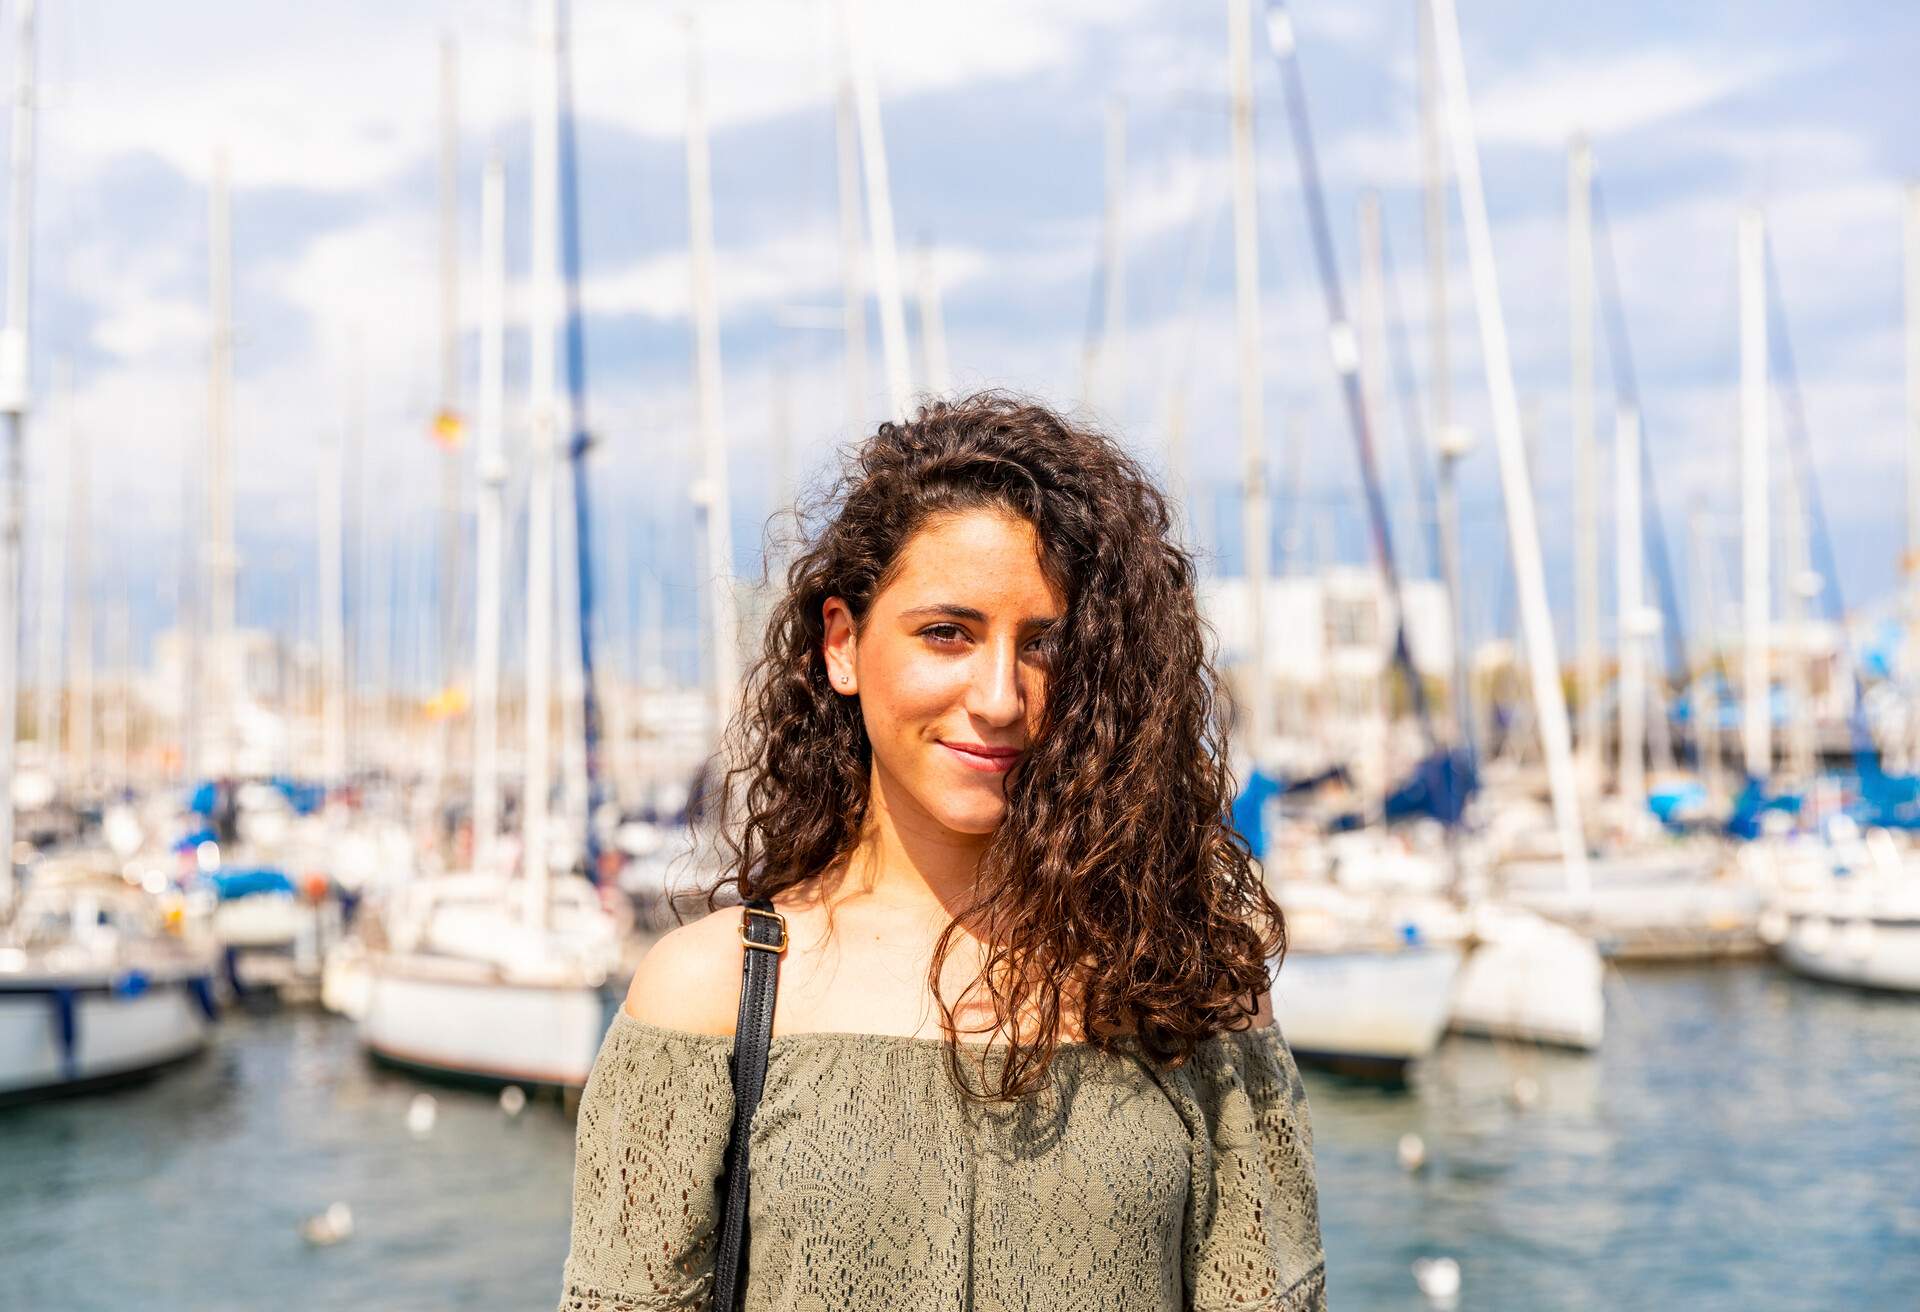 A curly-haired woman smiles against the backdrop of yachts docked on a harbour.